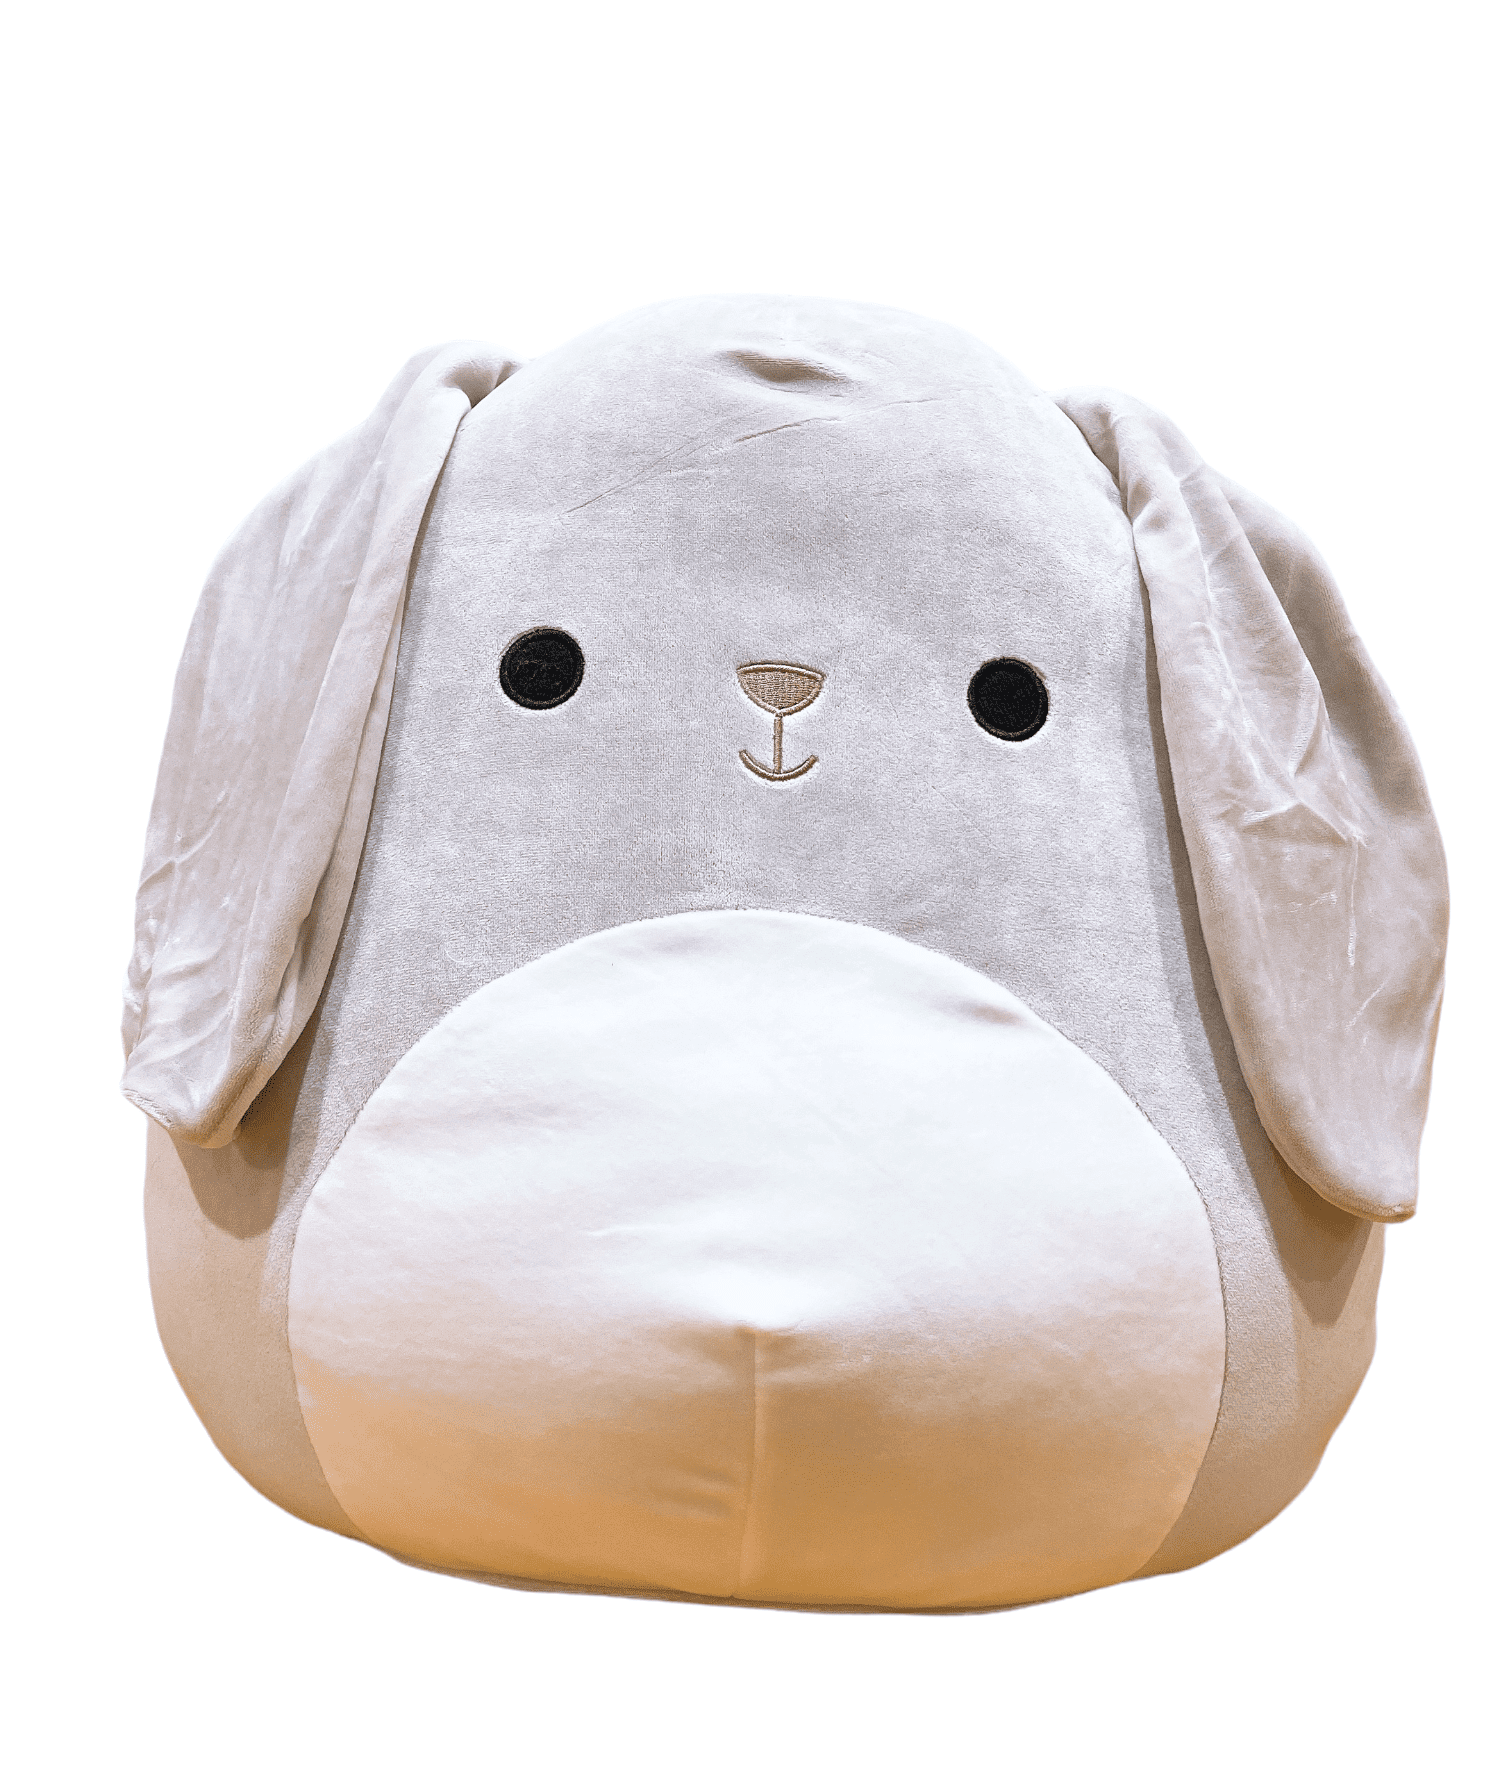 Squishmallow Grey Bunny Valentina 13 inch PlushNew with Tag 